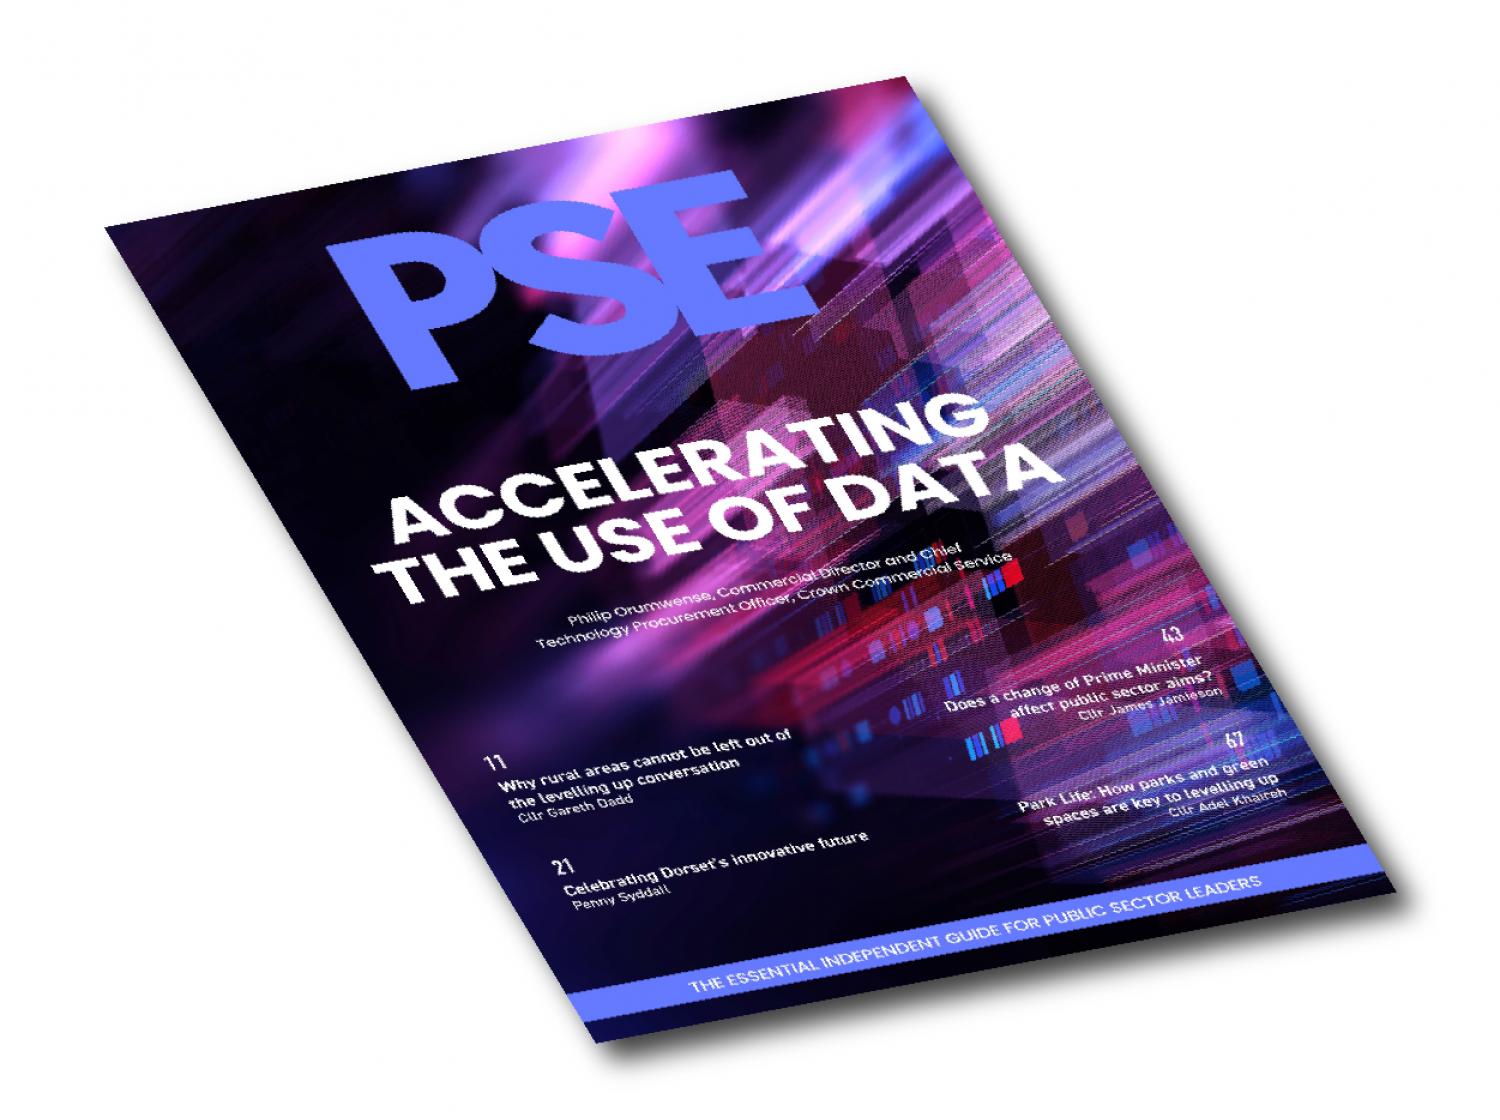 Accelerating the use of data